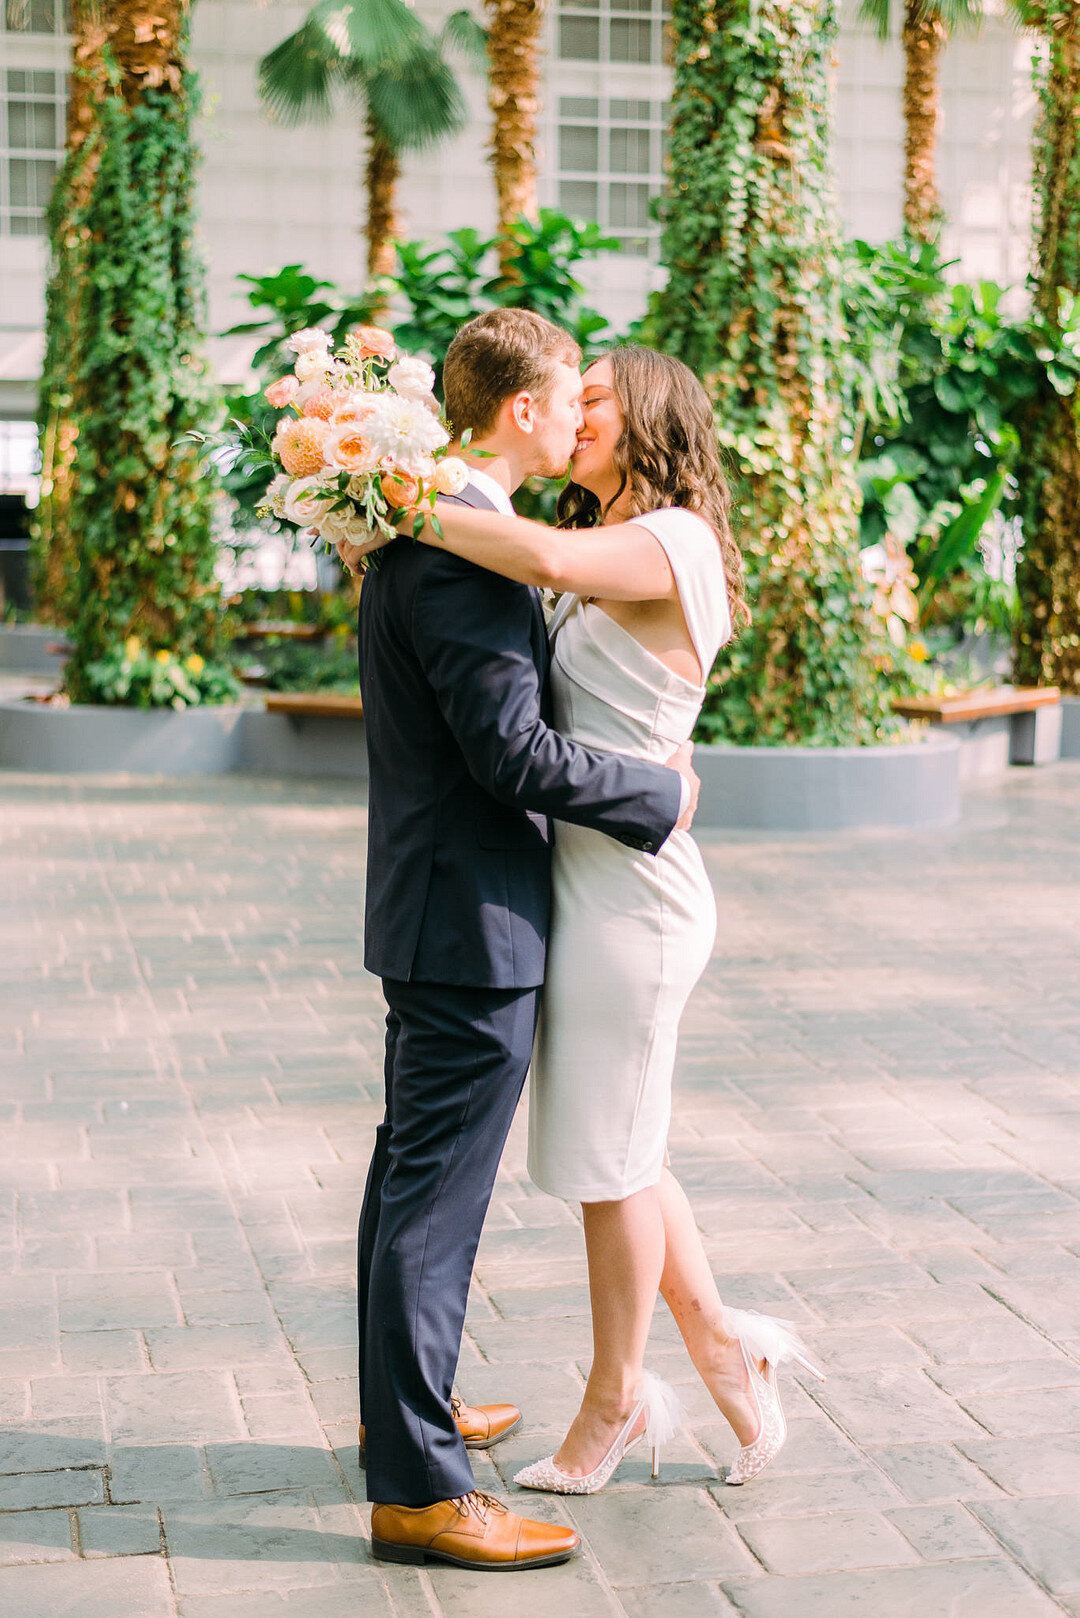 Urban Chic Elopement at Exclusive Rooftop Bar, Navy Pier Chicago captured by Joshua Harrison Photography